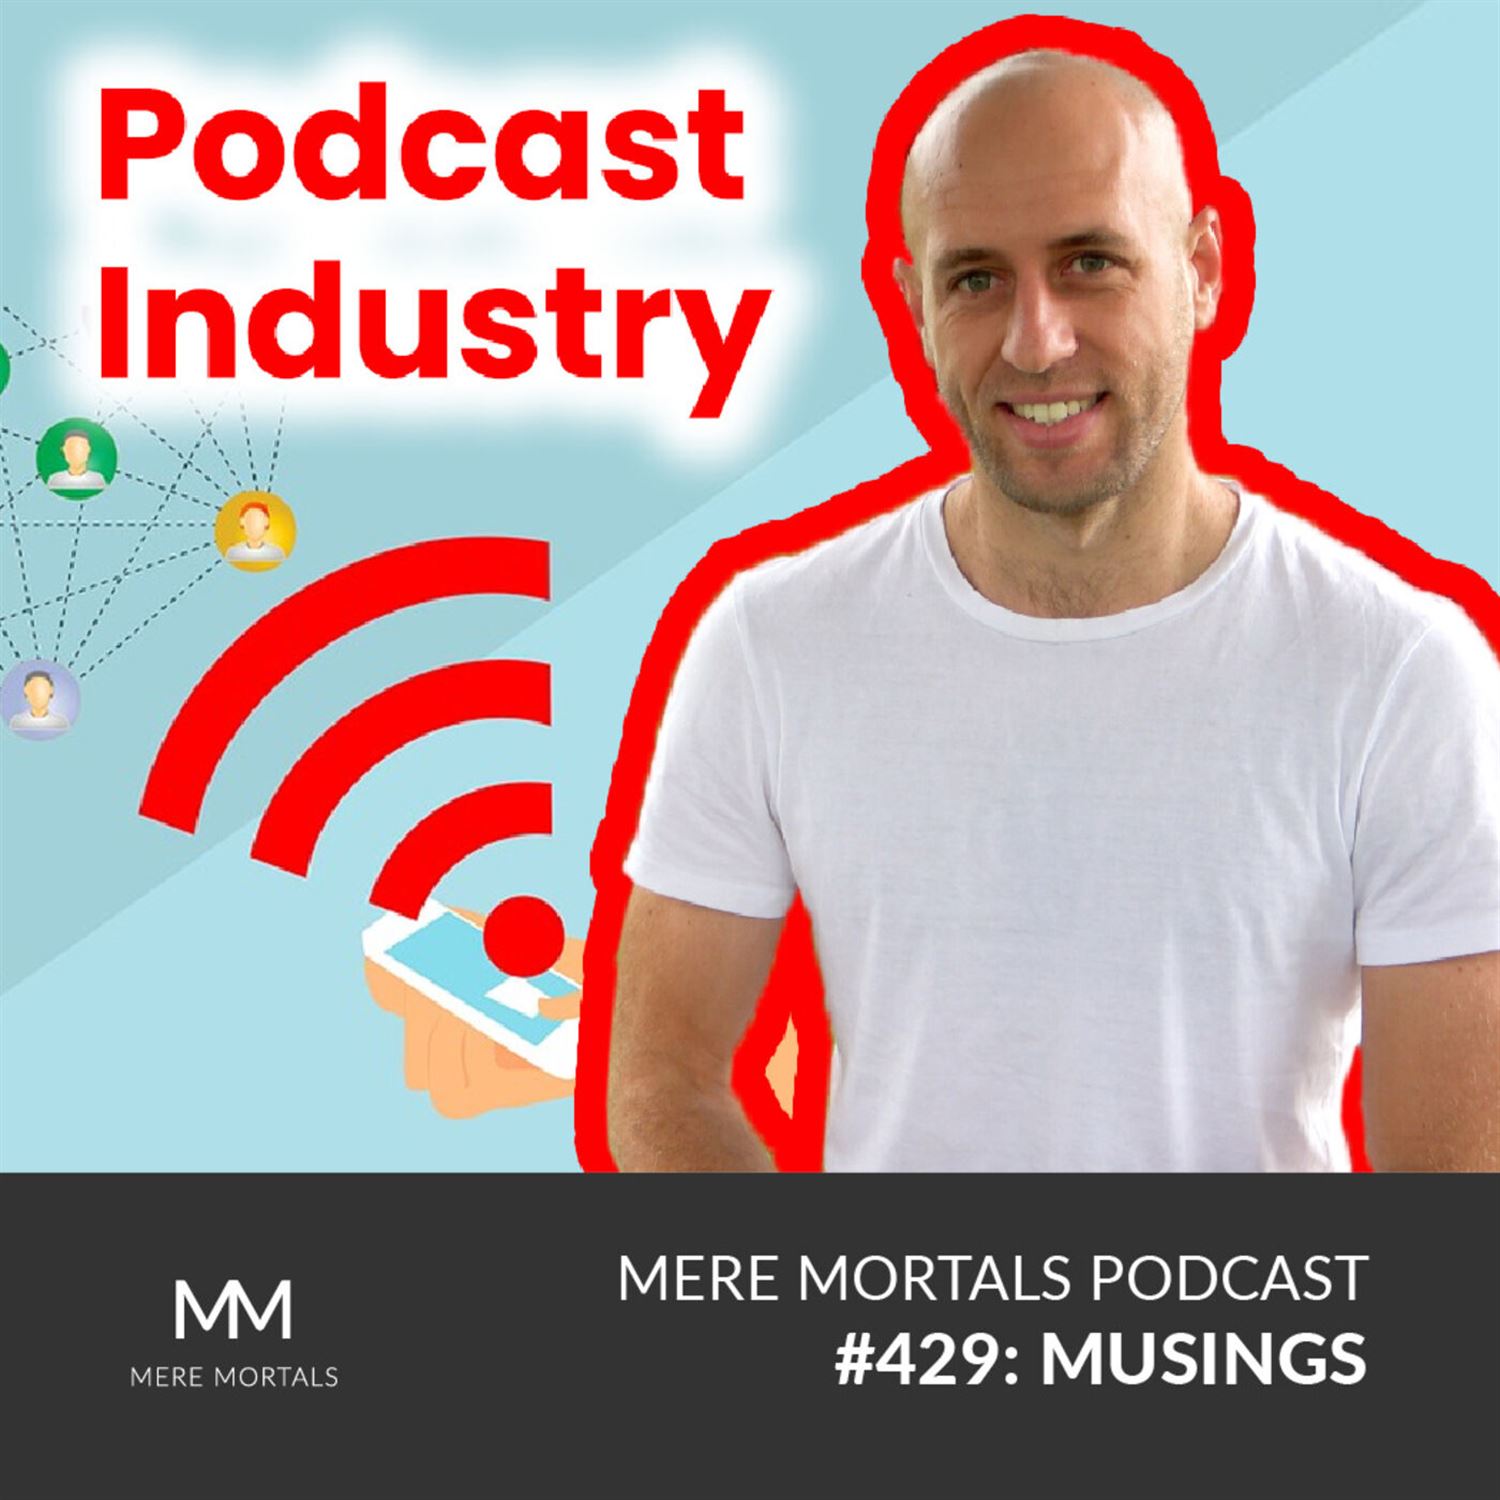 The Podcast Industry | Observations From The Inside